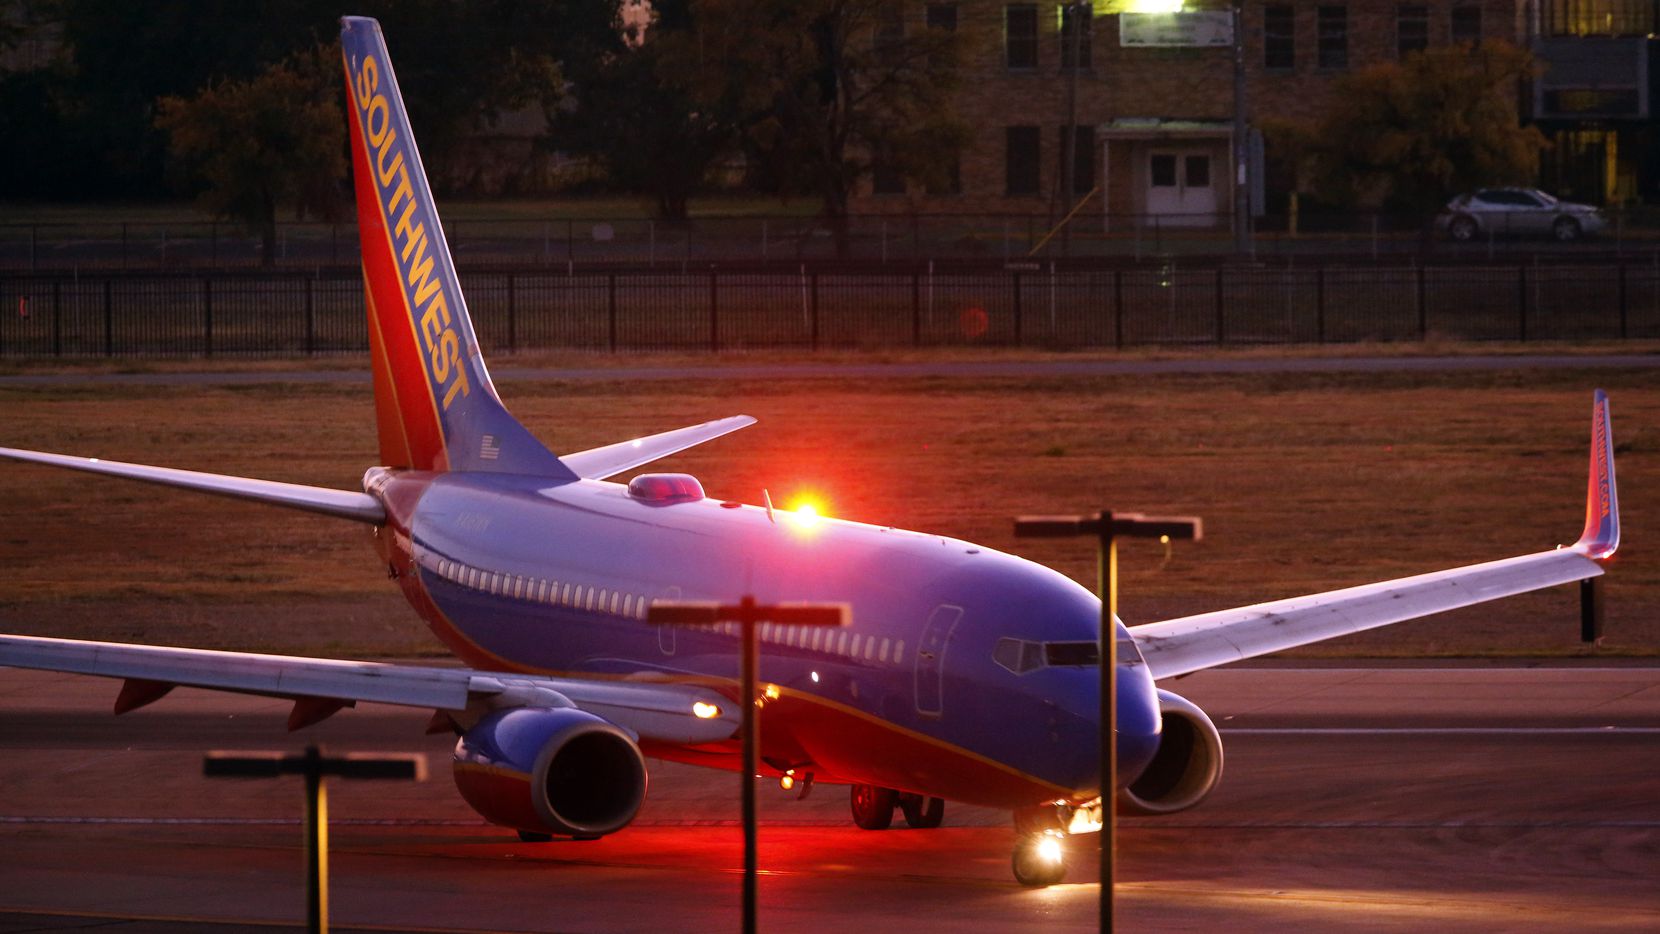 Southwest Airlines Manage Booking